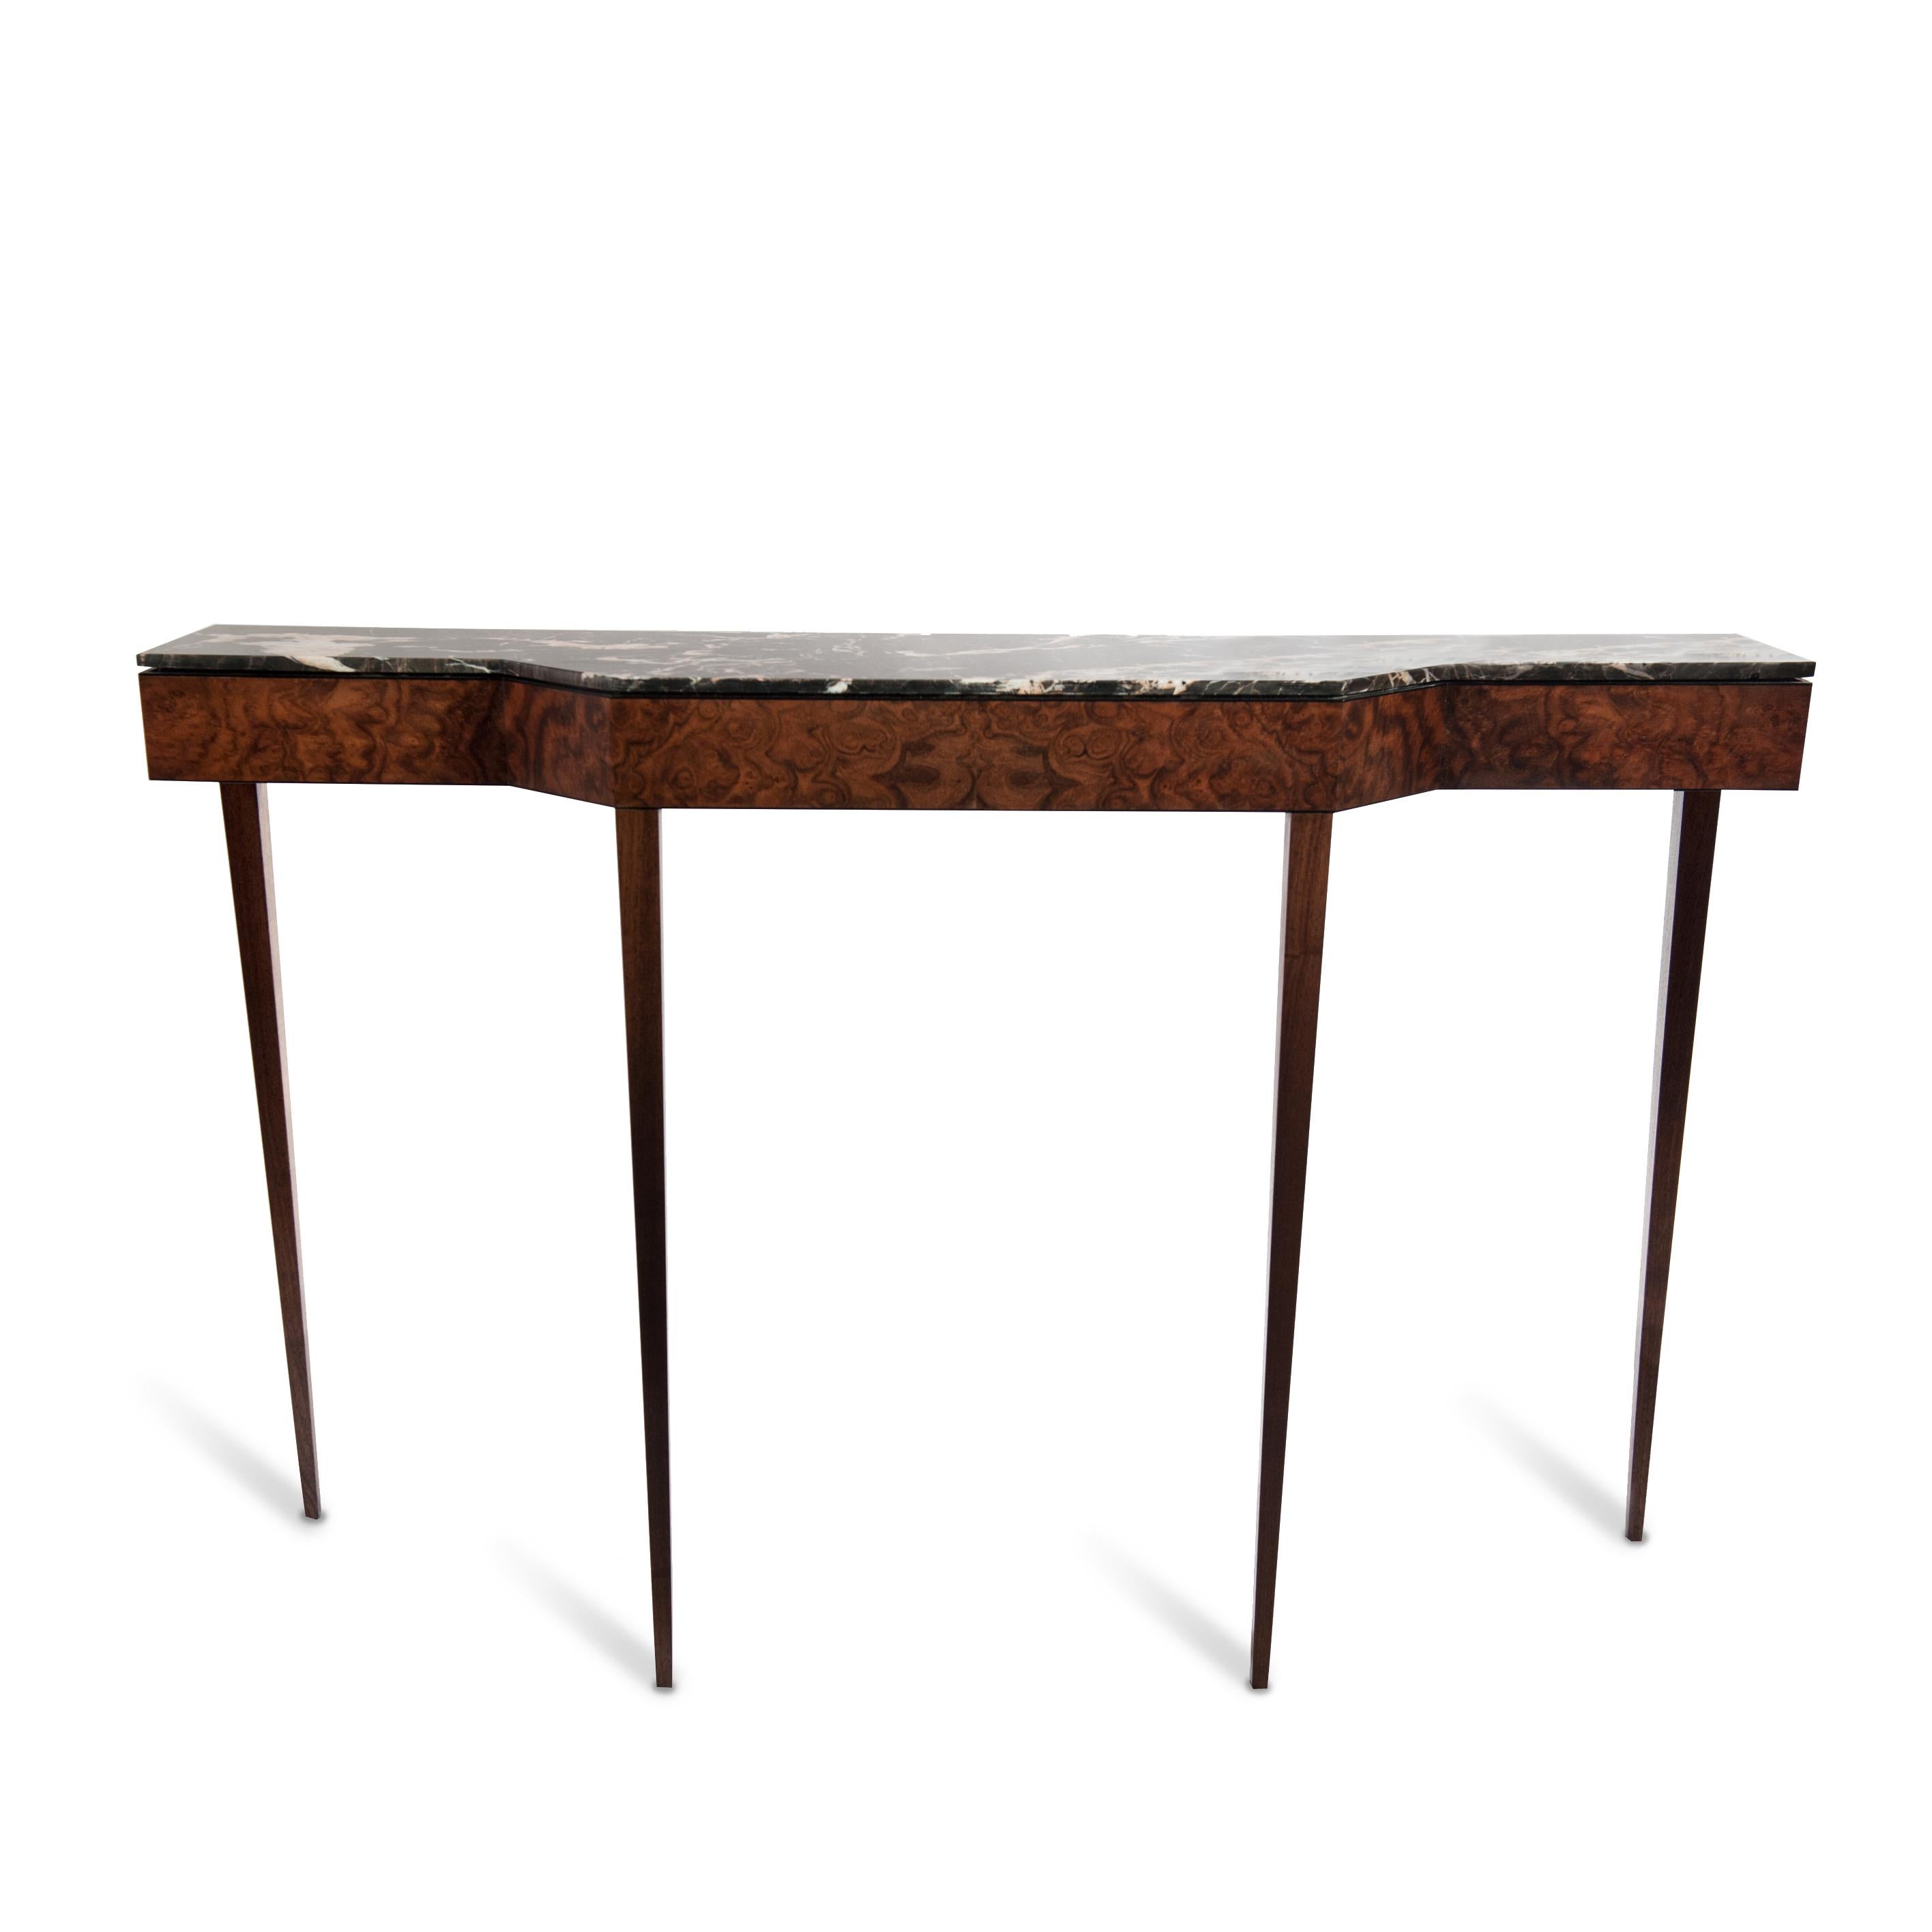 It's slim figure make it perfect for every space in particular the entrance area. 

The structure is veneered in burr walnut. The extra thin legs are made in solid walnut and the top is in dark marble.

Due to his thin figure we supply the fixing to